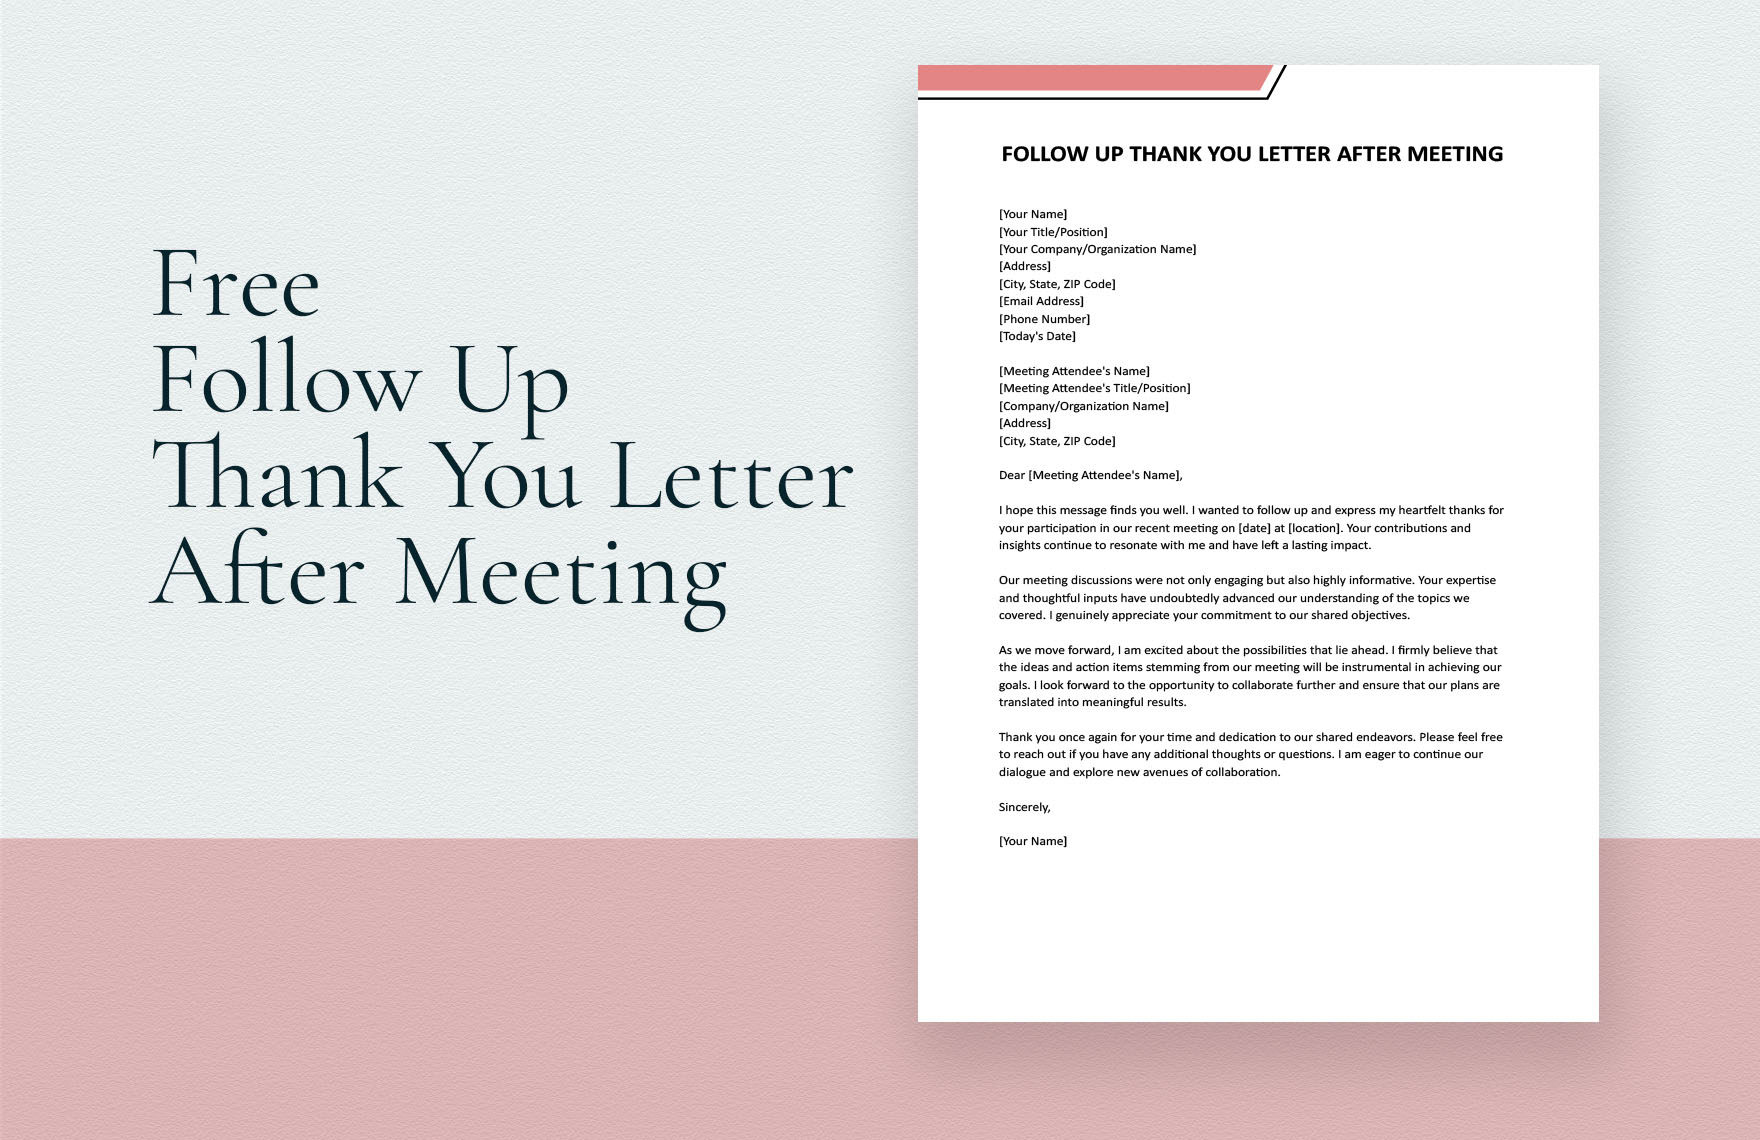 Free Follow Up Thank You Letter After Meeting